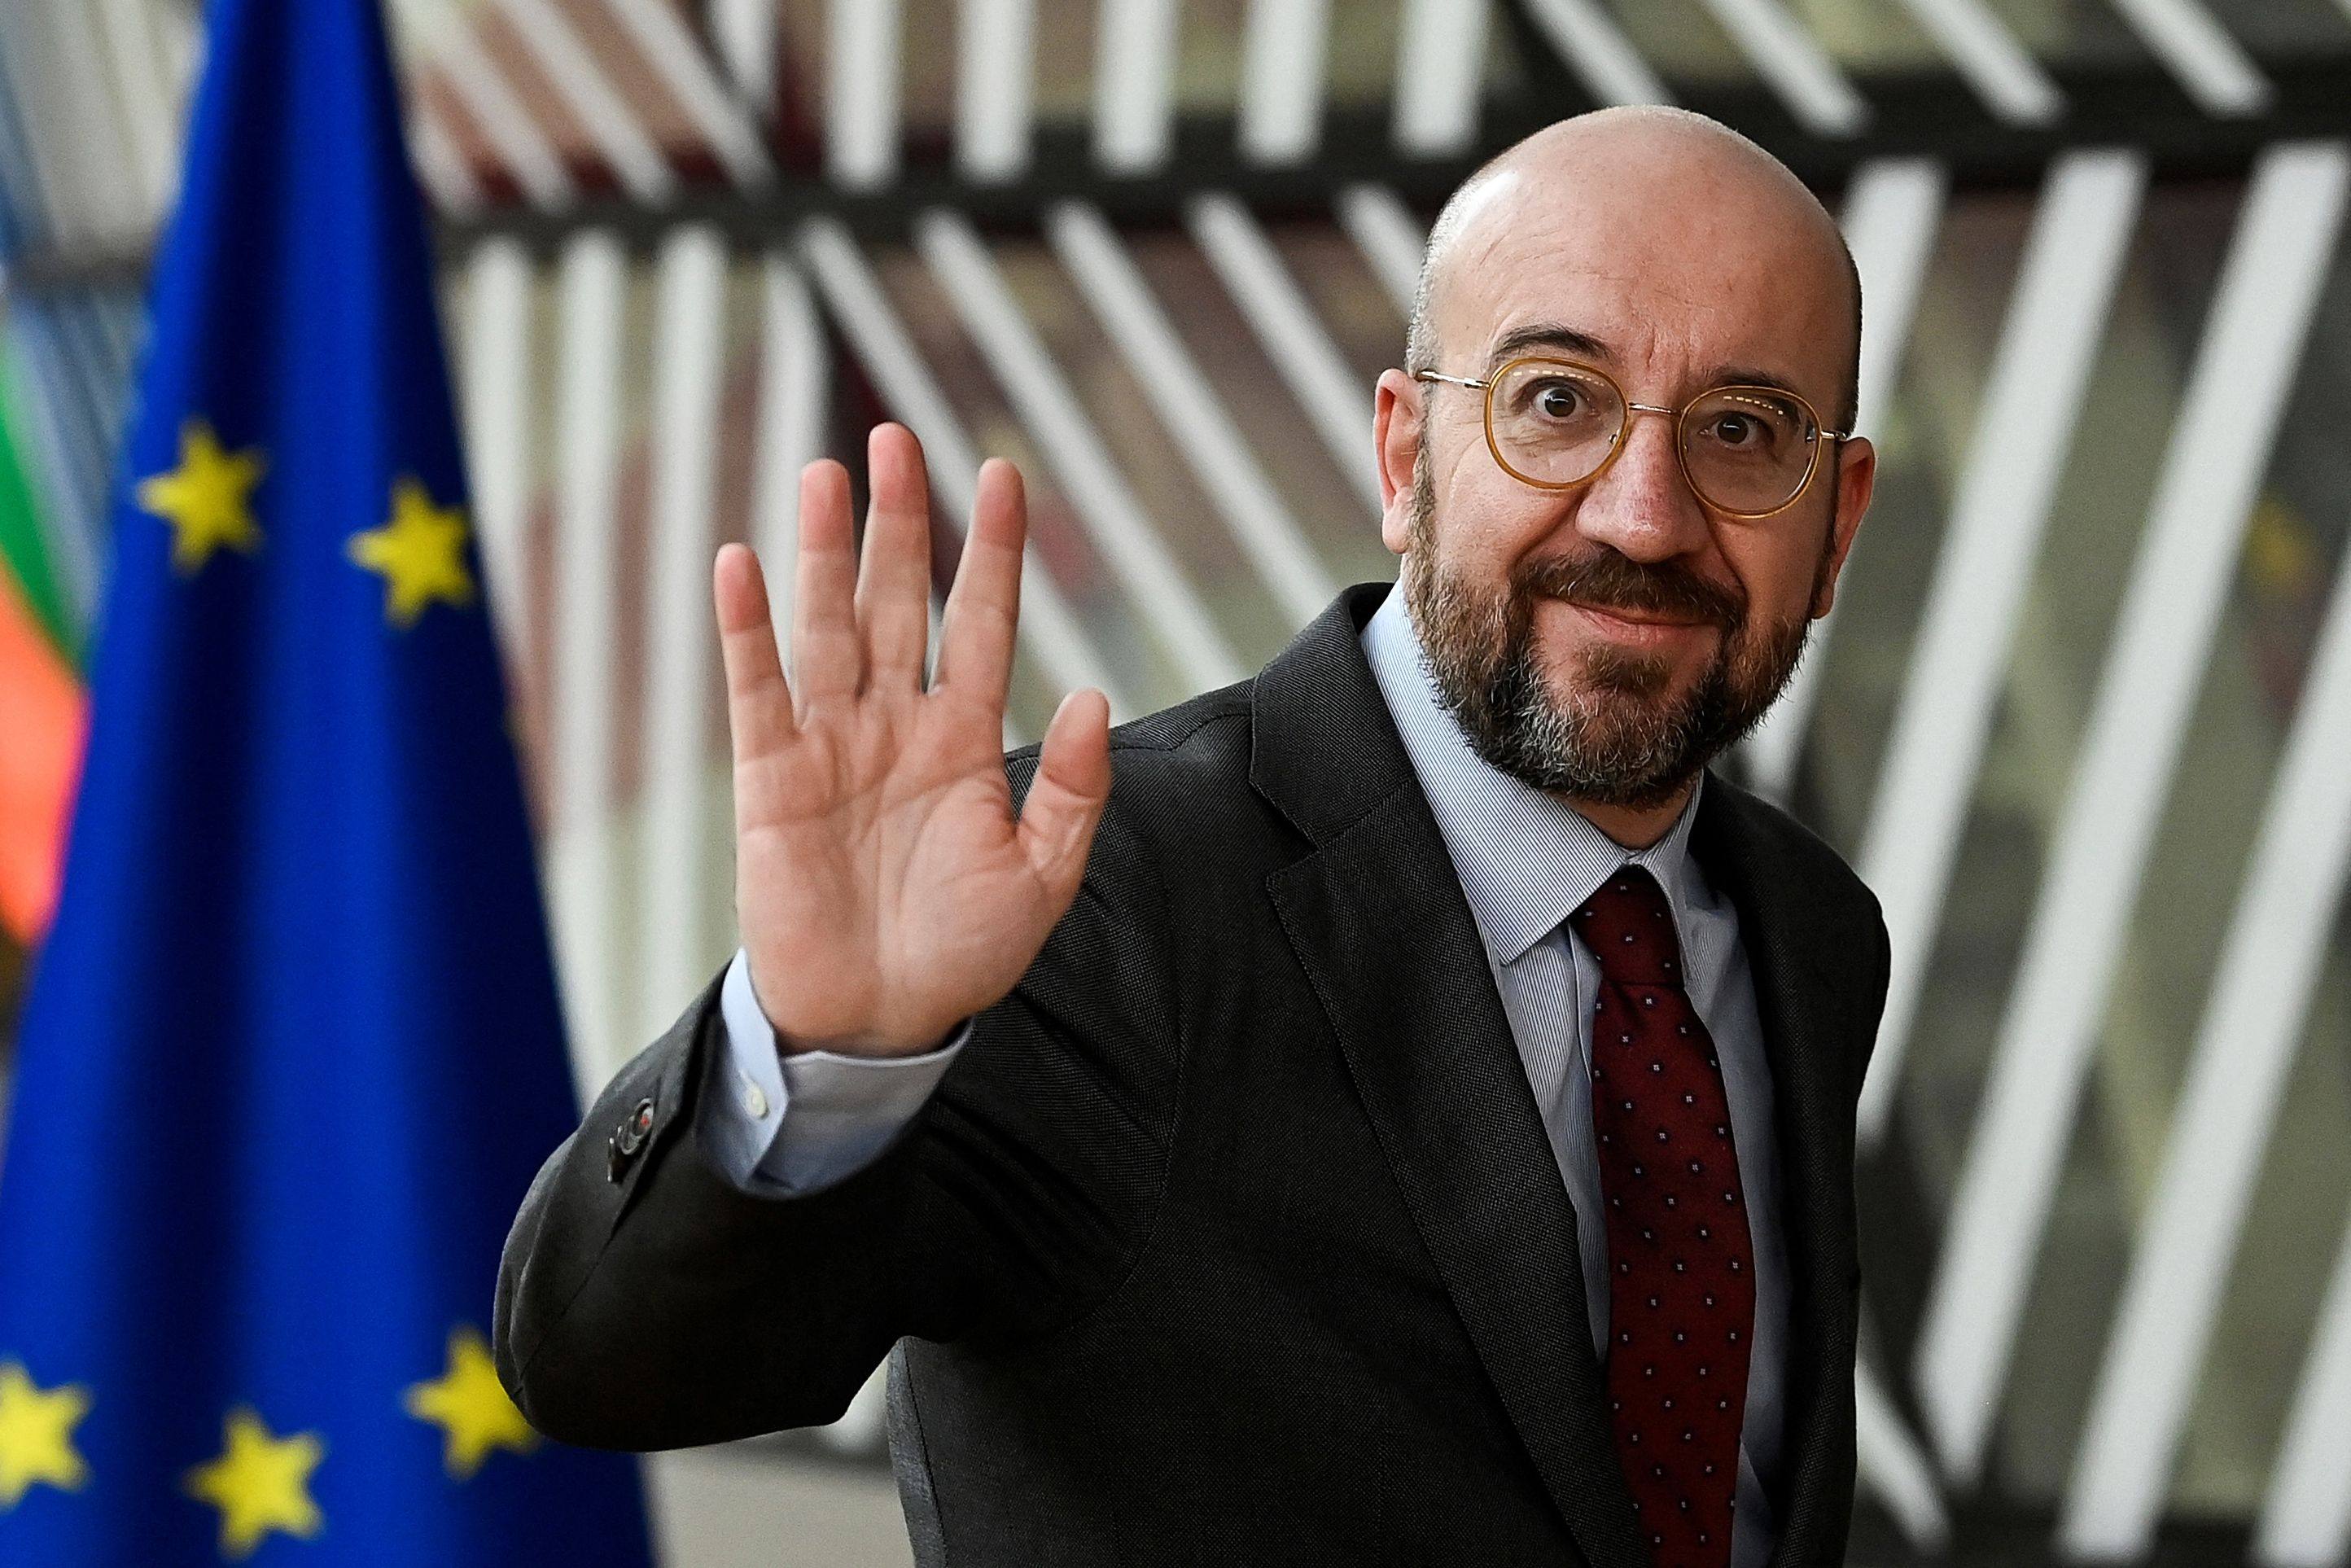 Charles Michel said on Sunday he will step down early from his position as European Council president. Photo: AFP